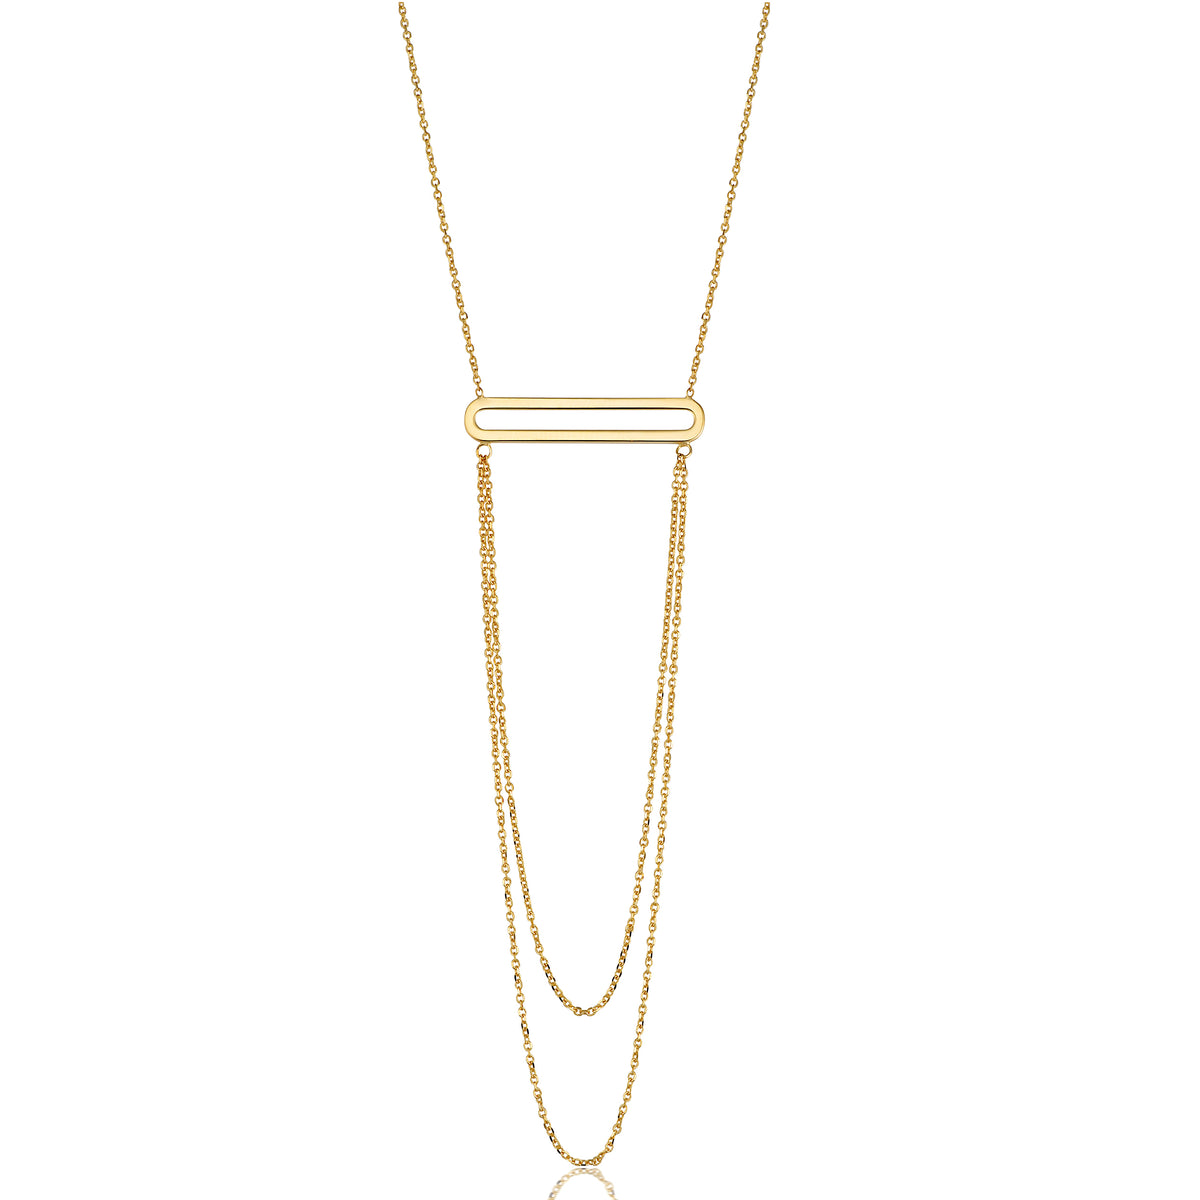 14K Yellow Gold Oval Bar Pendant With Layered Chain 18" Necklace fine designer jewelry for men and women